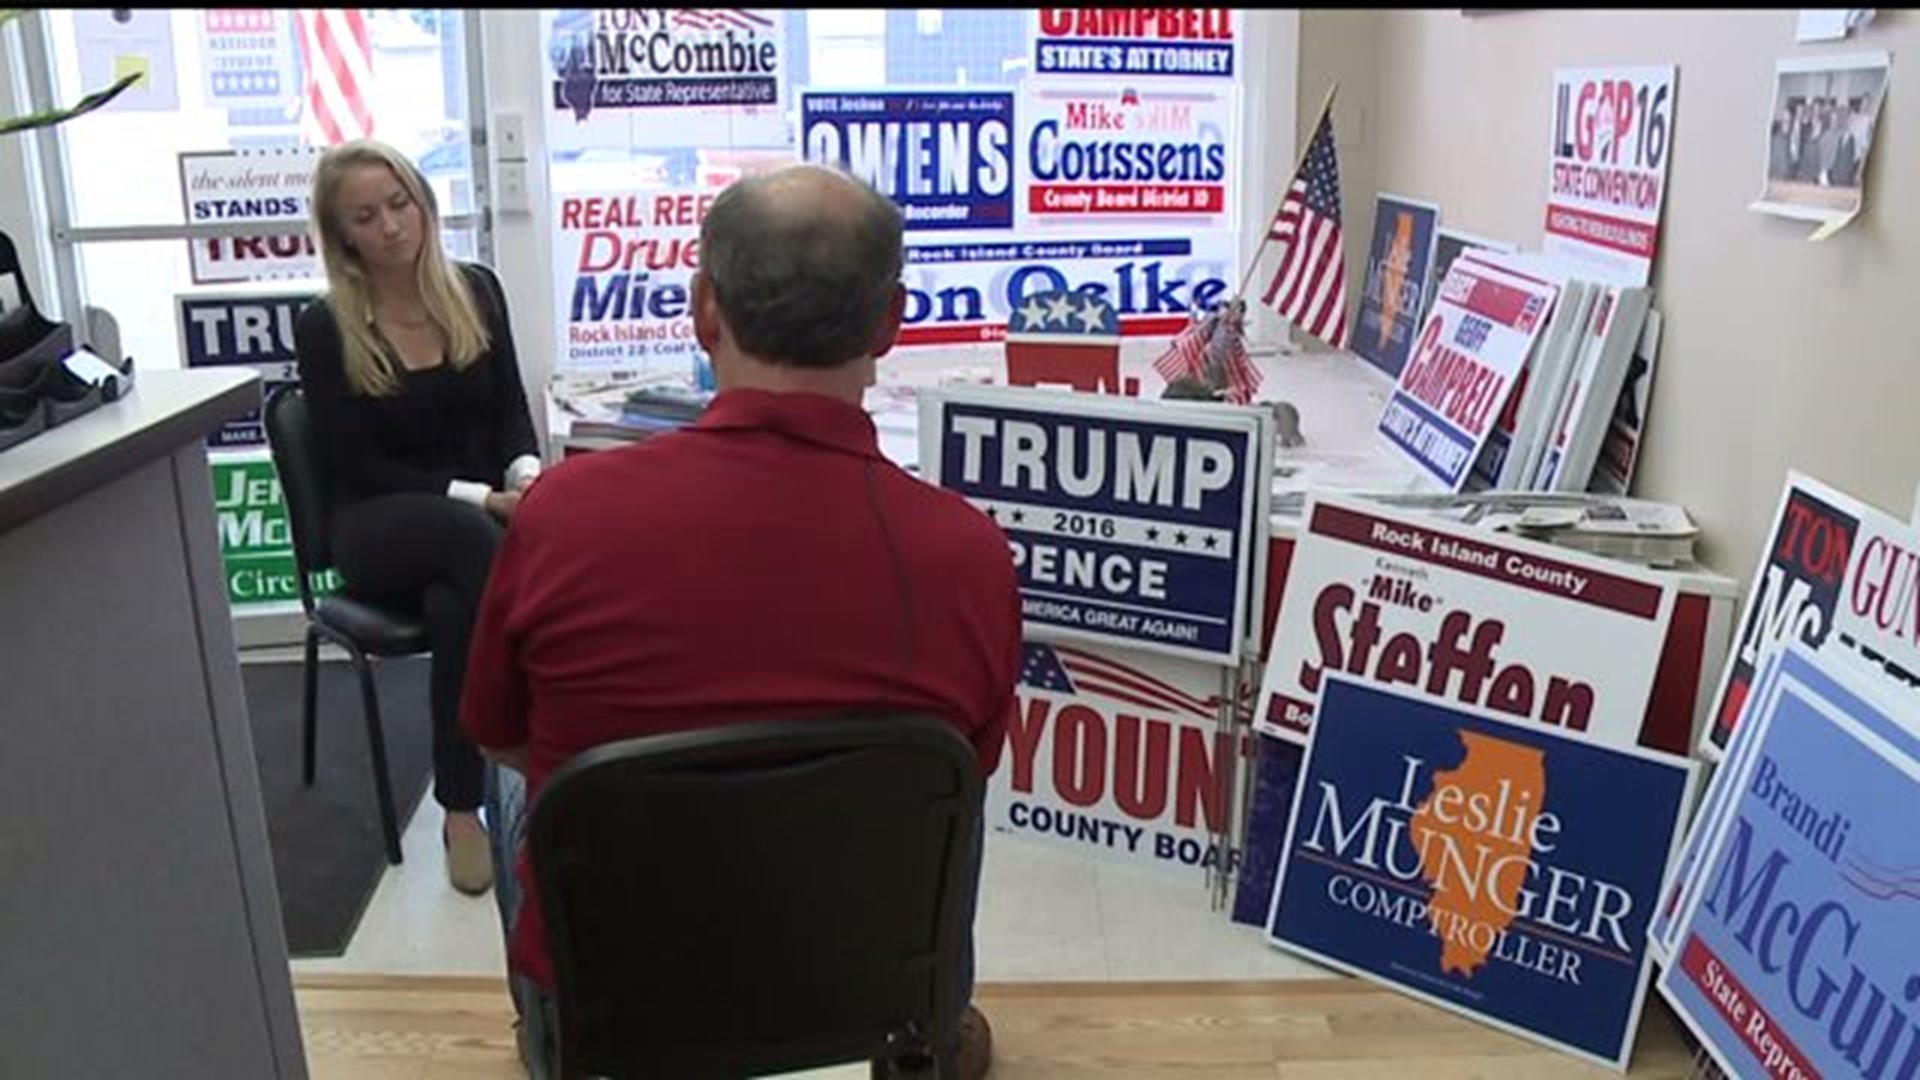 Local political leaders react to Trump comments